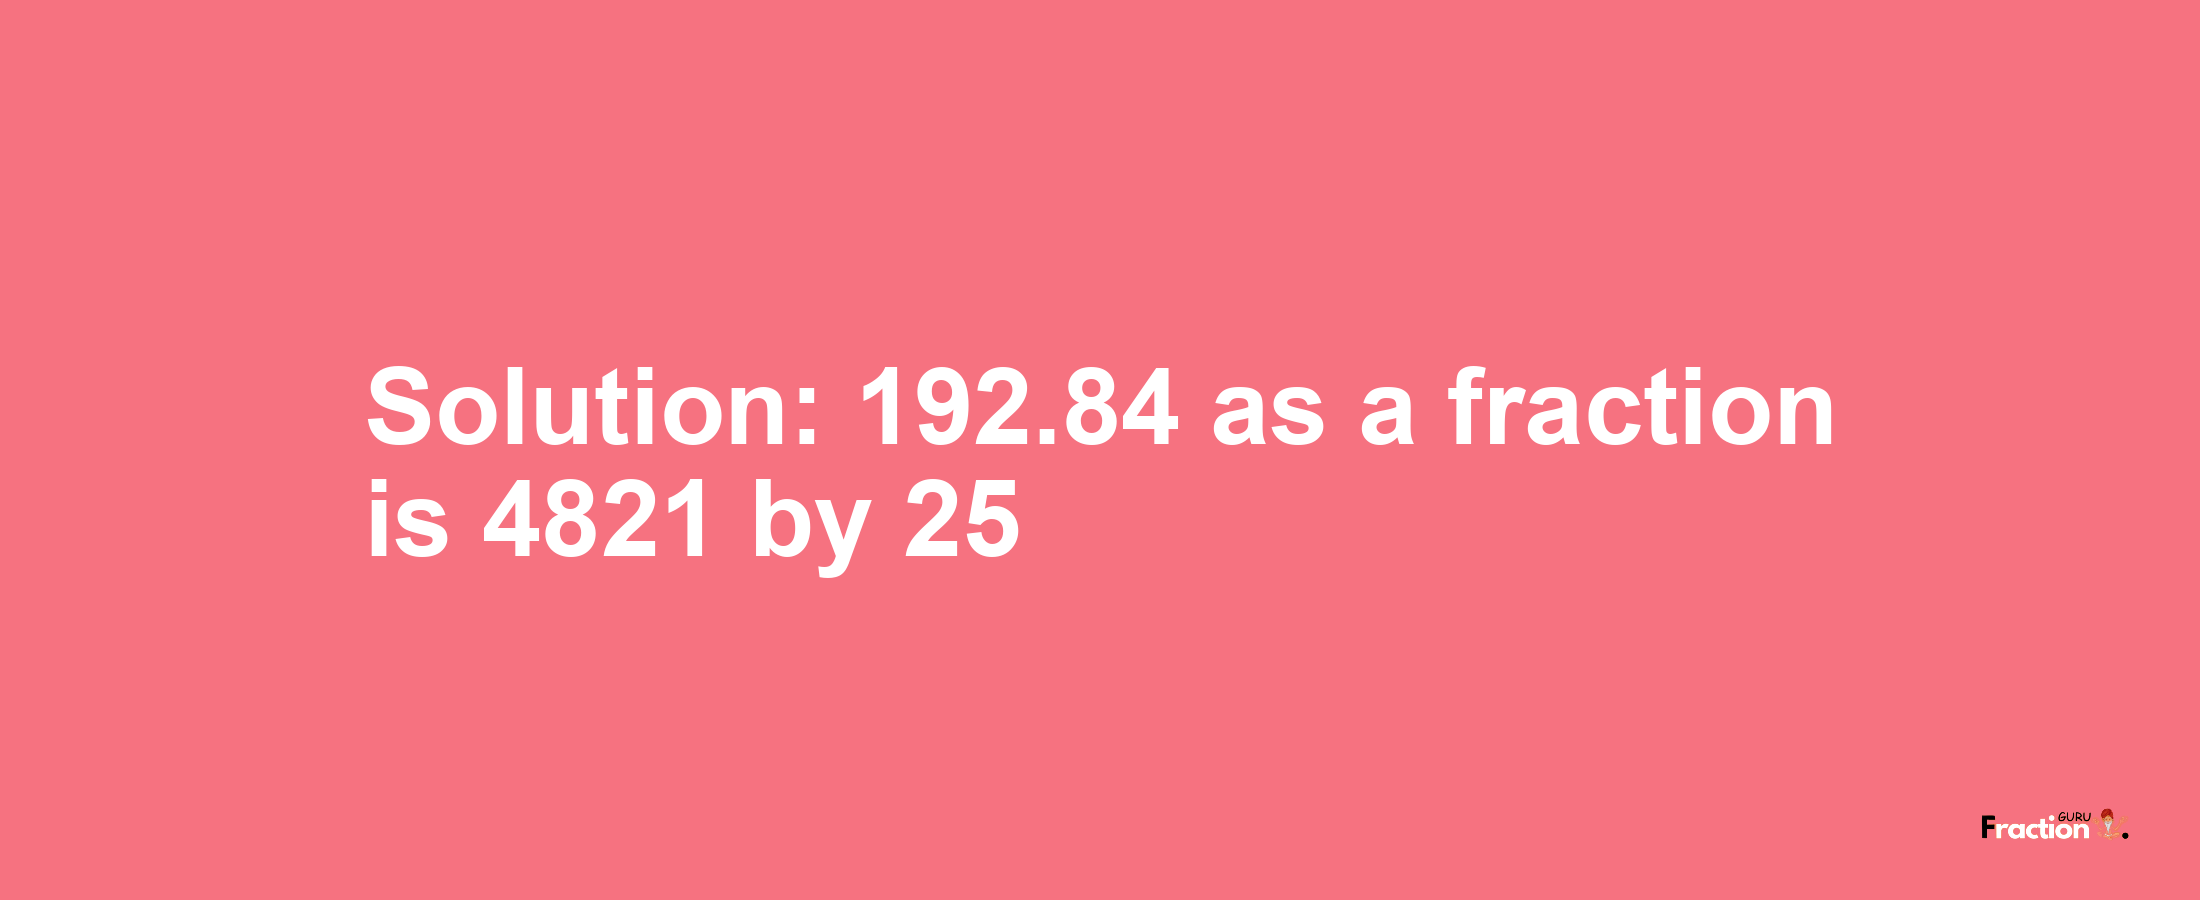 Solution:192.84 as a fraction is 4821/25